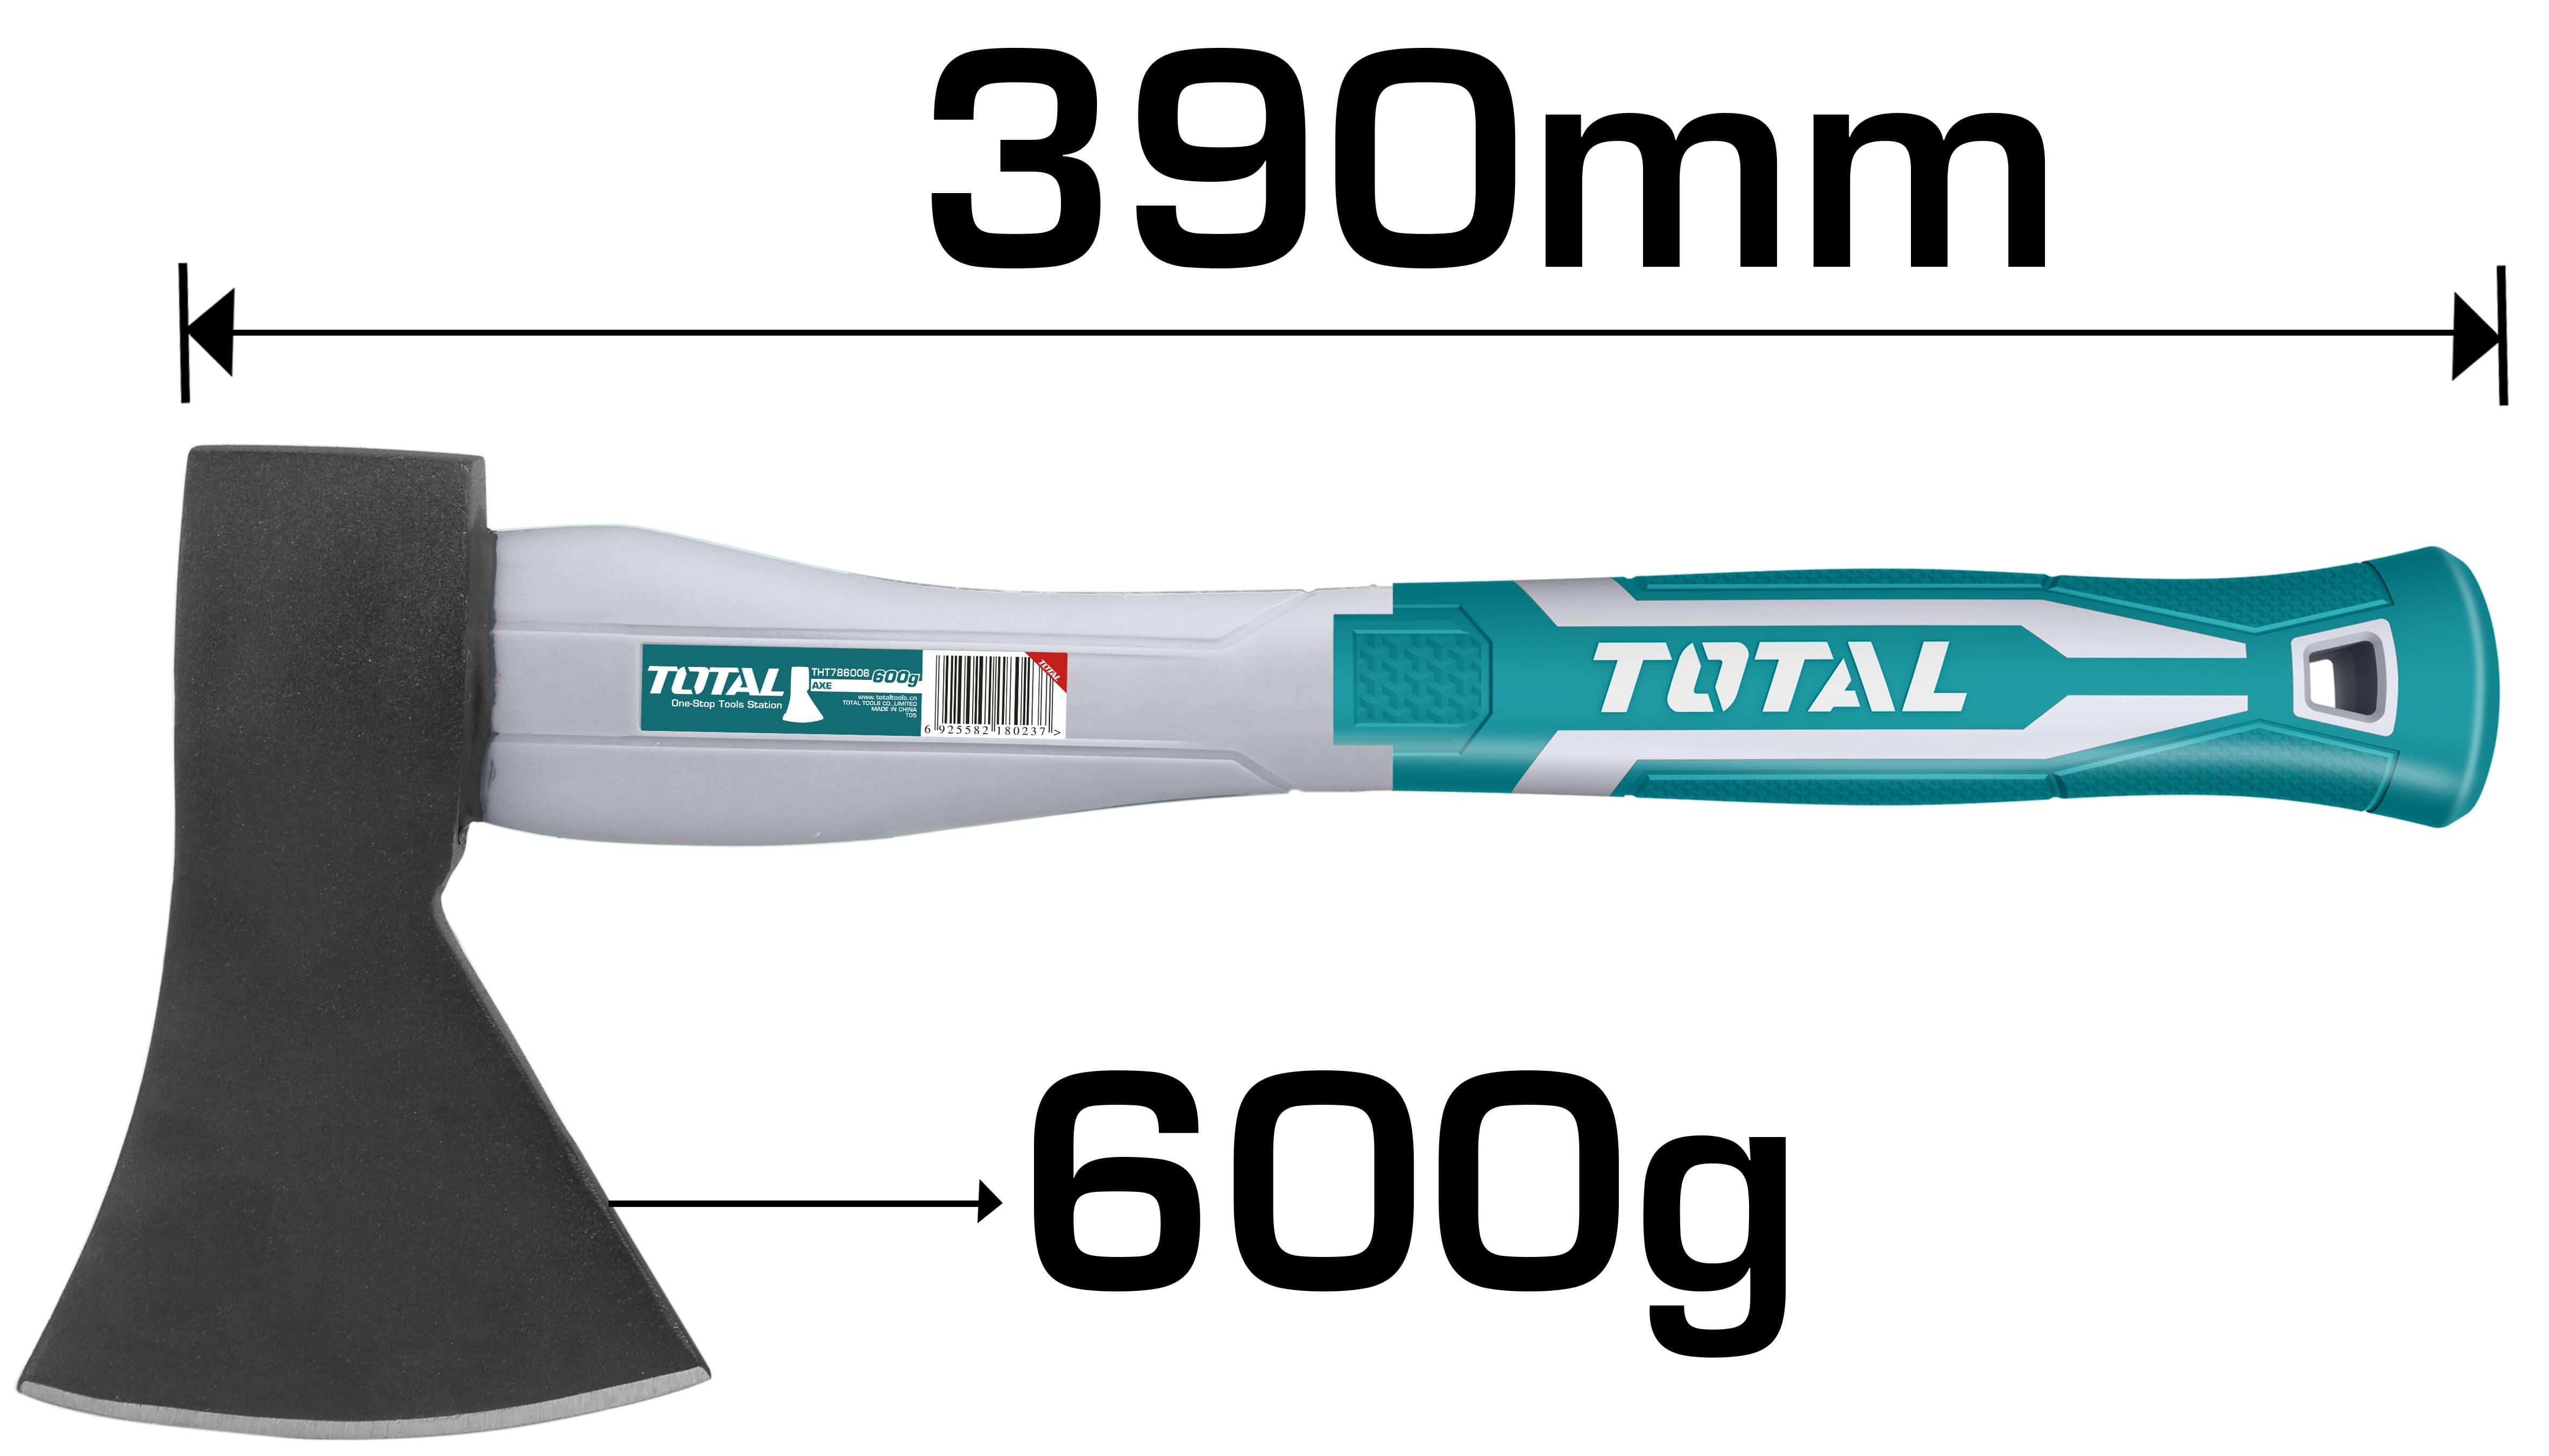 Total Axe 600g - THT786006 | Supply Master | Accra, Ghana Tools Building Steel Engineering Hardware tool